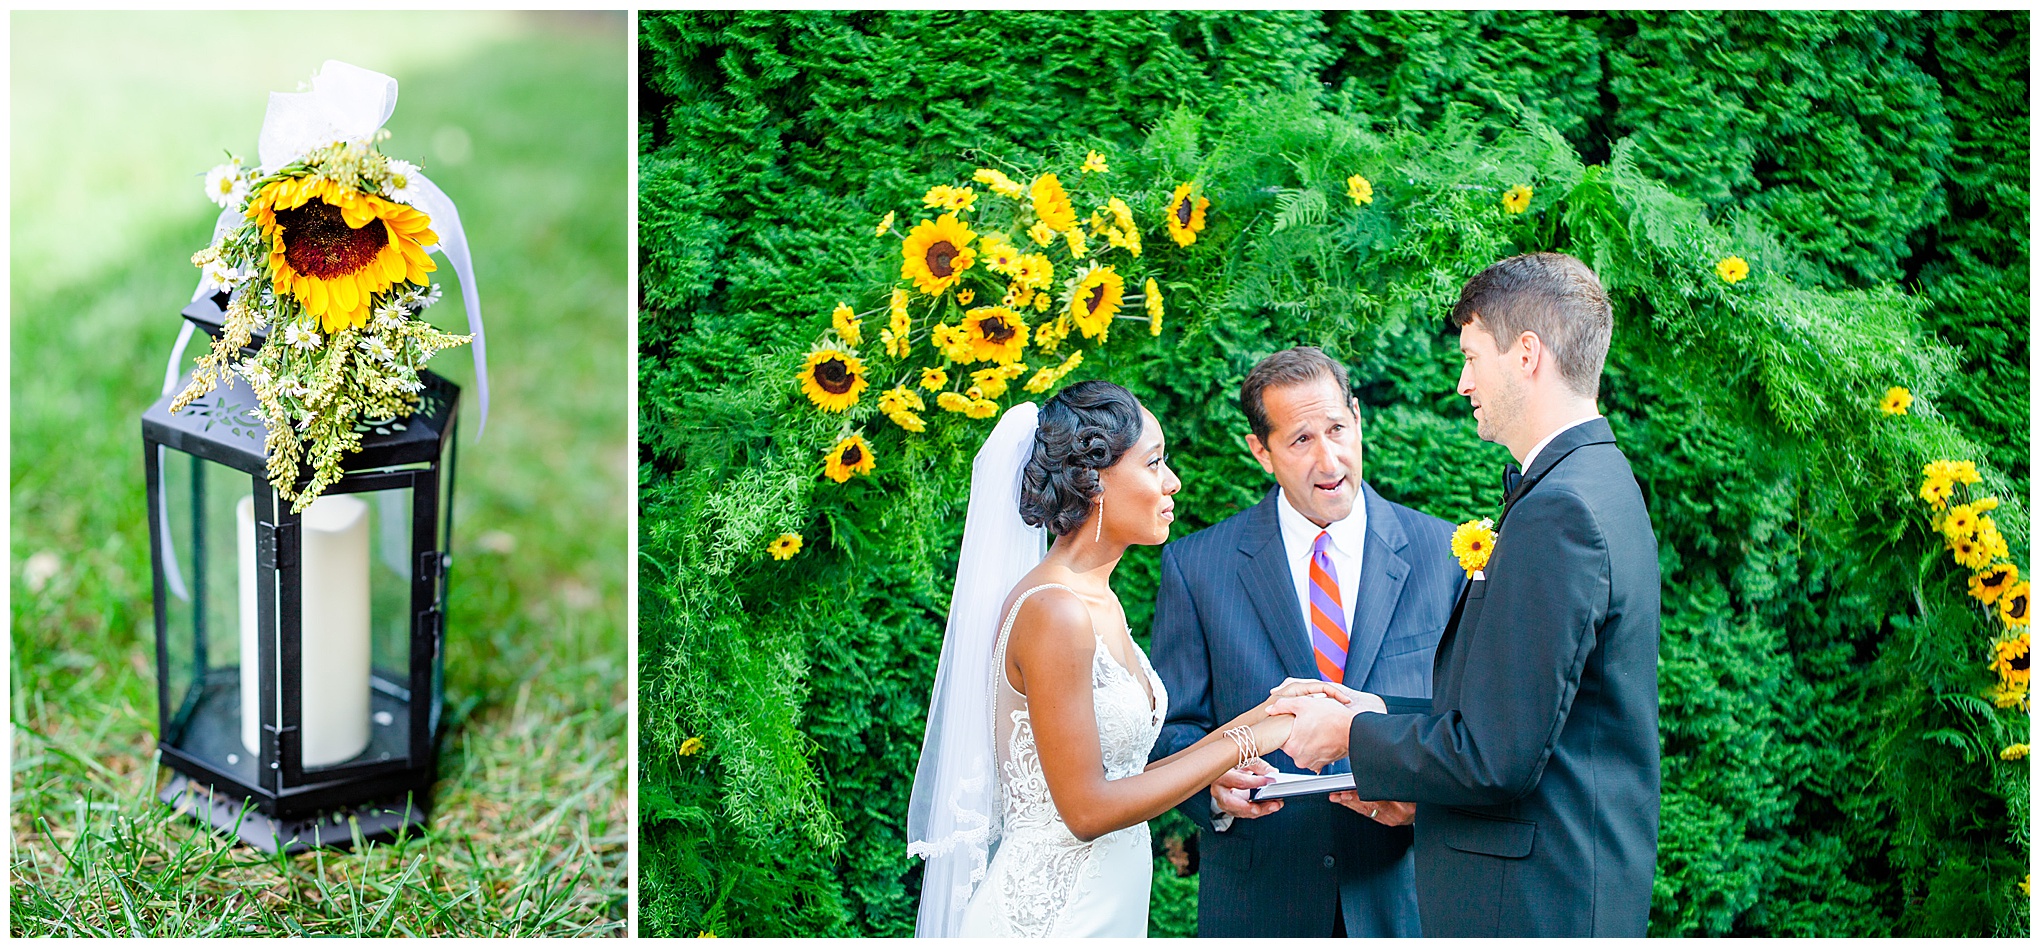 summer mansion at valley country club wedding, Maryland wedding, MD wedding, Maryland wedding photographer, summer wedding, summer wedding inspiration, Baltimore wedding photographer, DC wedding photographer, country club wedding, yellow aesthetic, Rachel E.H. Photography, sunflower arch